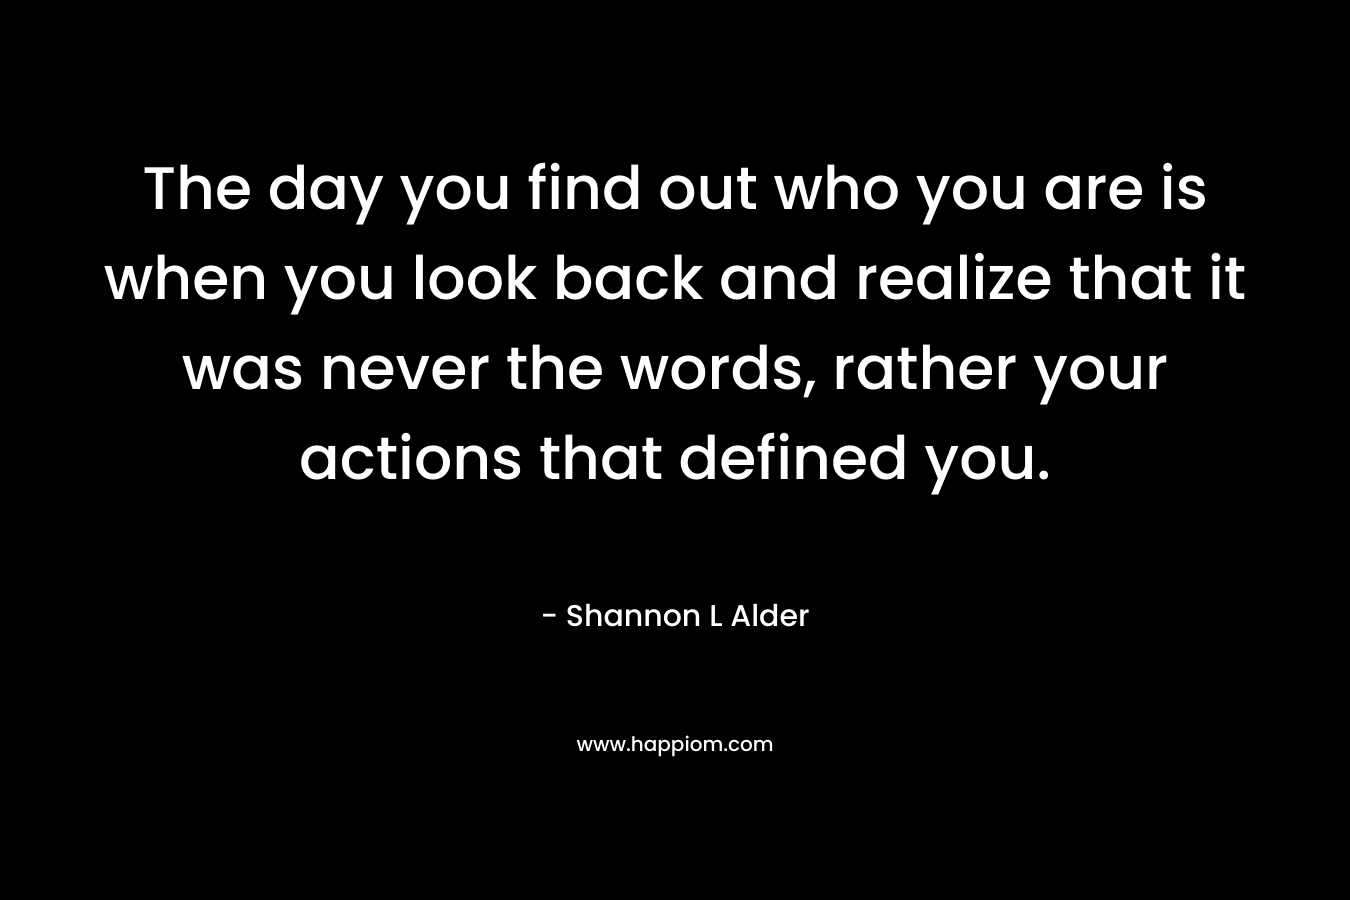 The day you find out who you are is when you look back and realize that it was never the words, rather your actions that defined you.